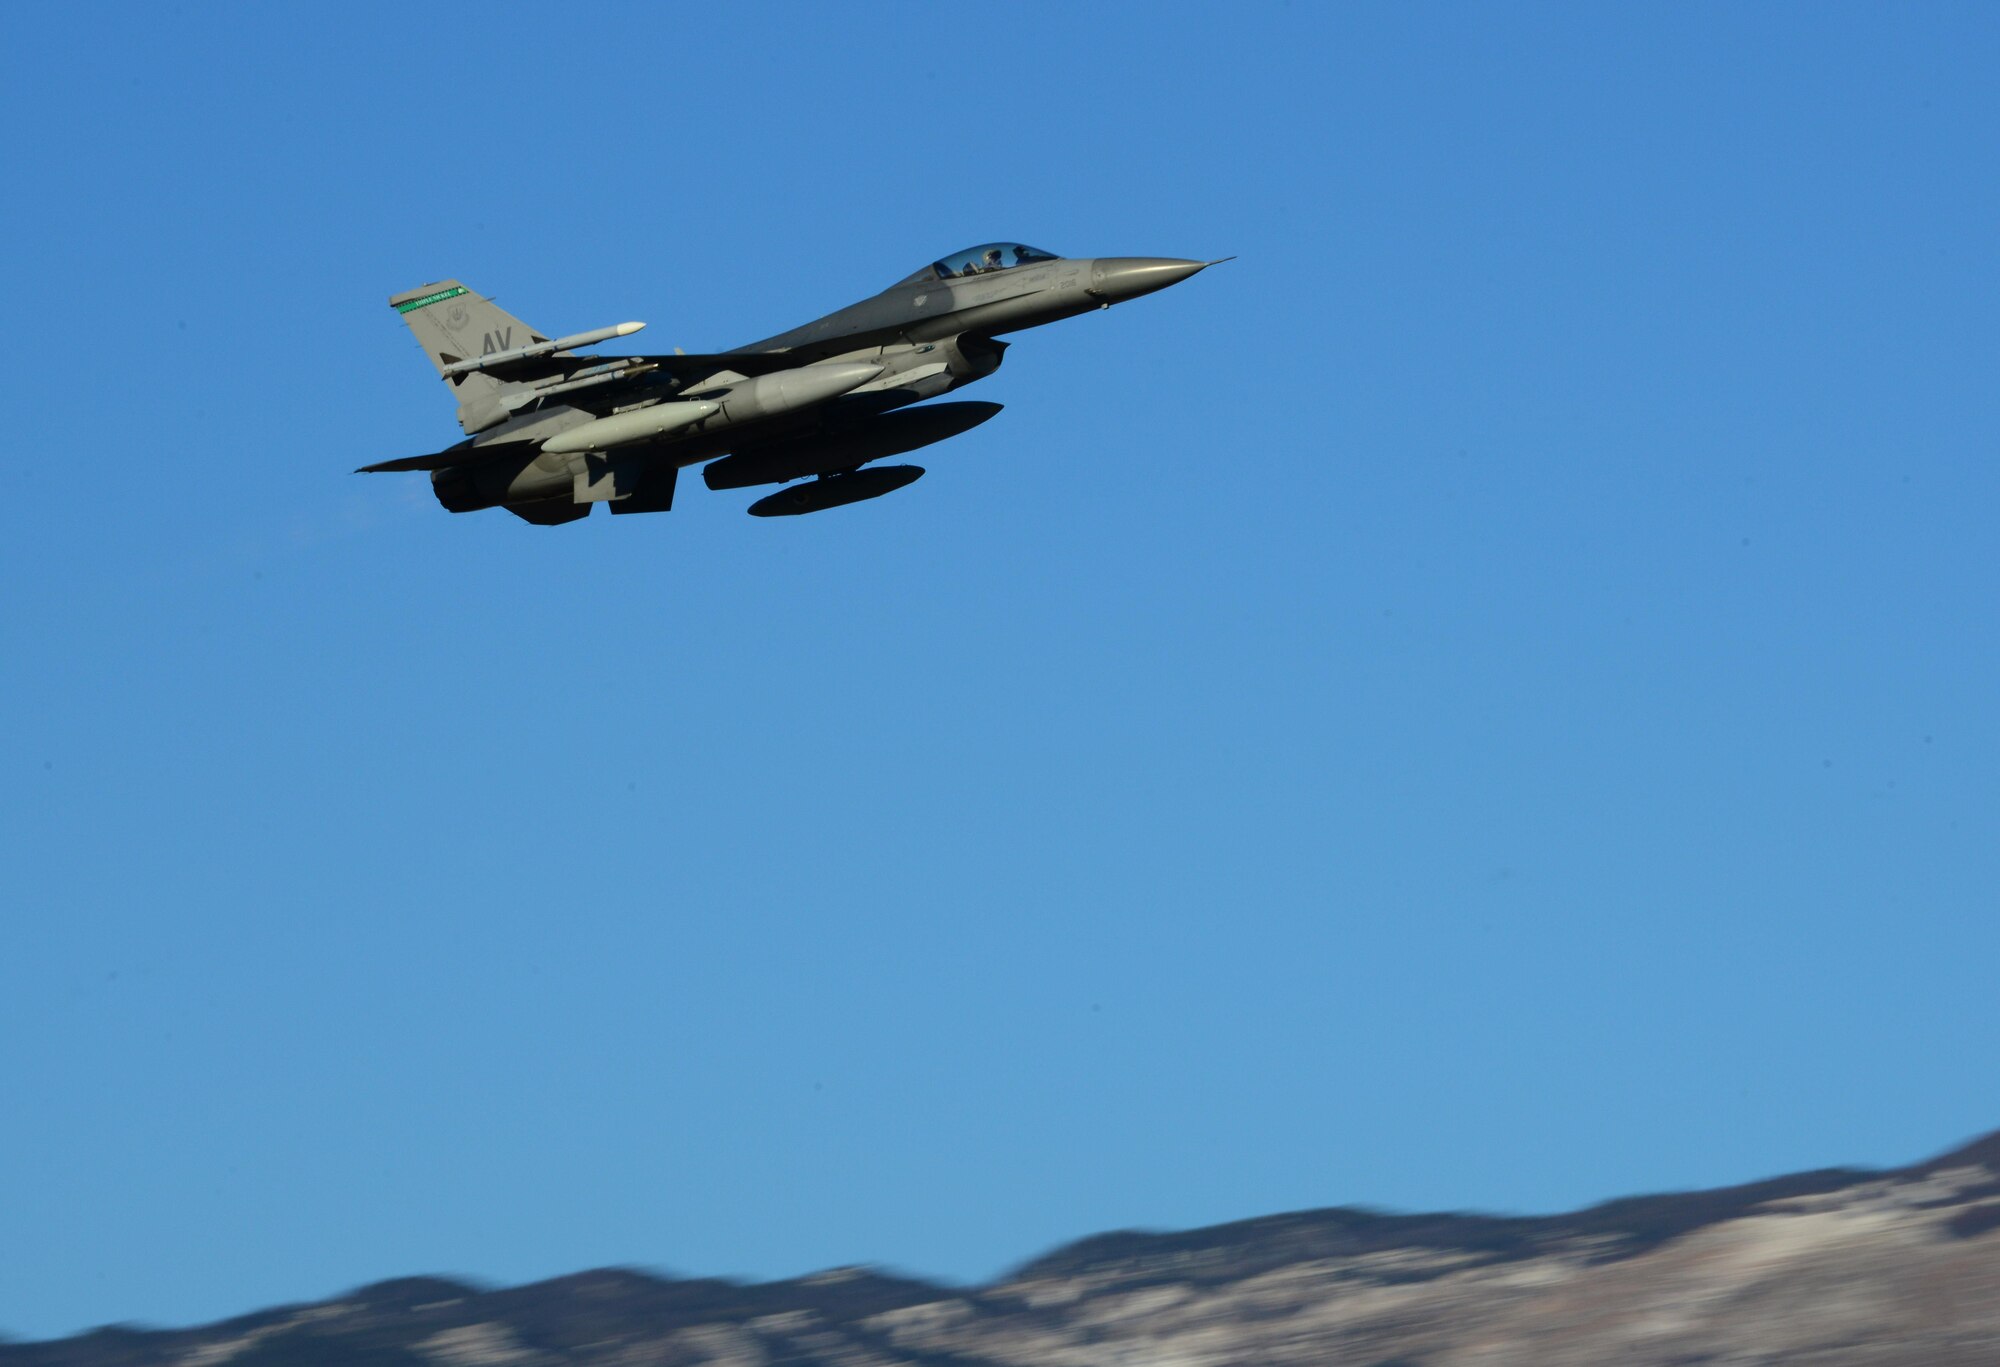 A 555th Fighter Squadron F-16 Fighting Falcon departs from Aviano Air Base, Italy on Jan. 21, 2016 to support a flying training deployment in Souda Bay, Greece. Fourteen F-16s, one KC-135 Stratotanker from the Arizona Air National Guard’s 161st Air Refueling Wing, and 280 Airmen deployed to Souda Bay to train with Greece’s Hellenic air force. (U.S. Air Force photo by Staff Sgt. Krystal Ardrey)